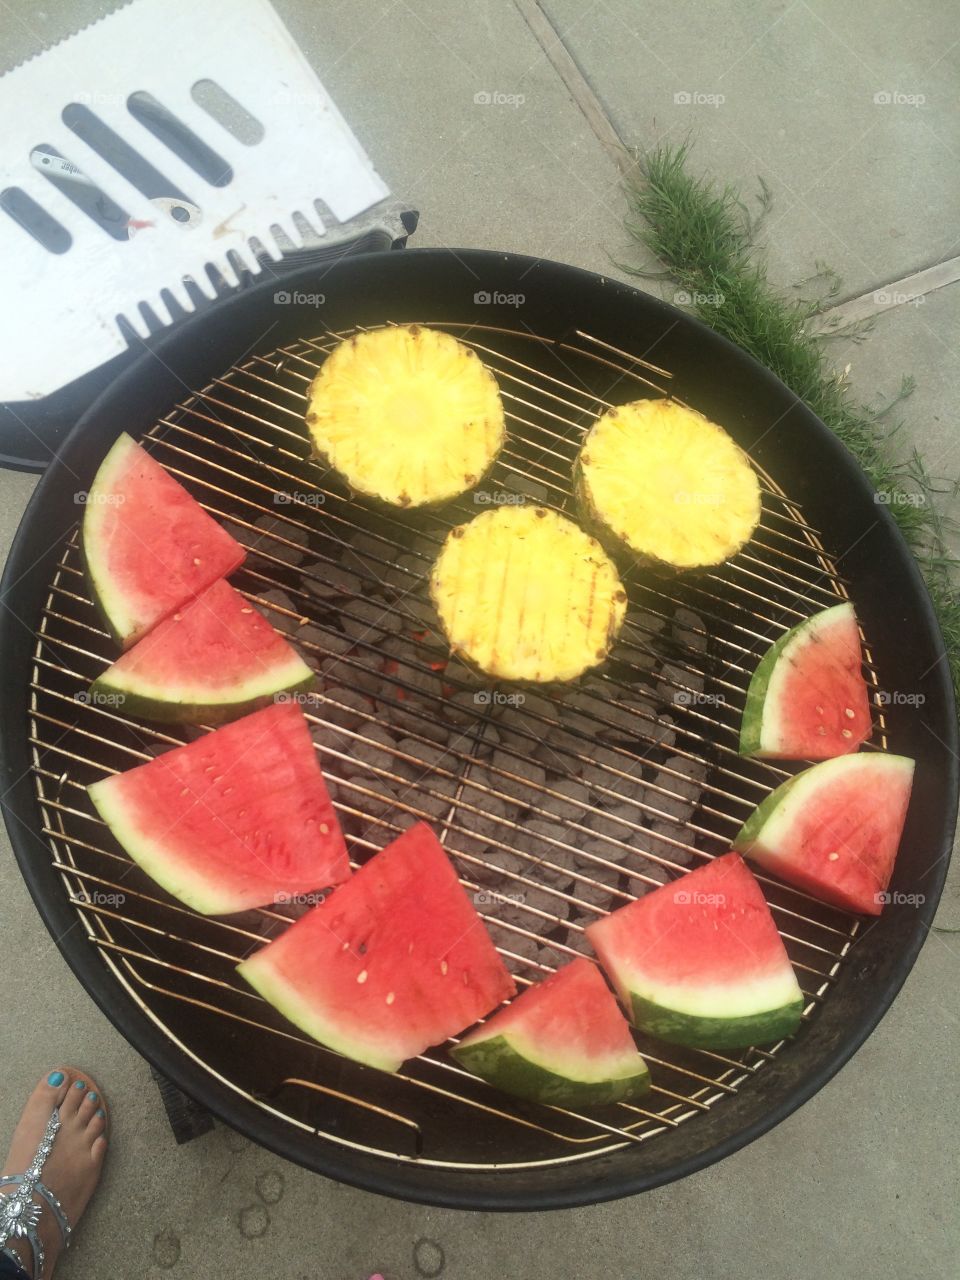 A happy vegetarian on 4th of July